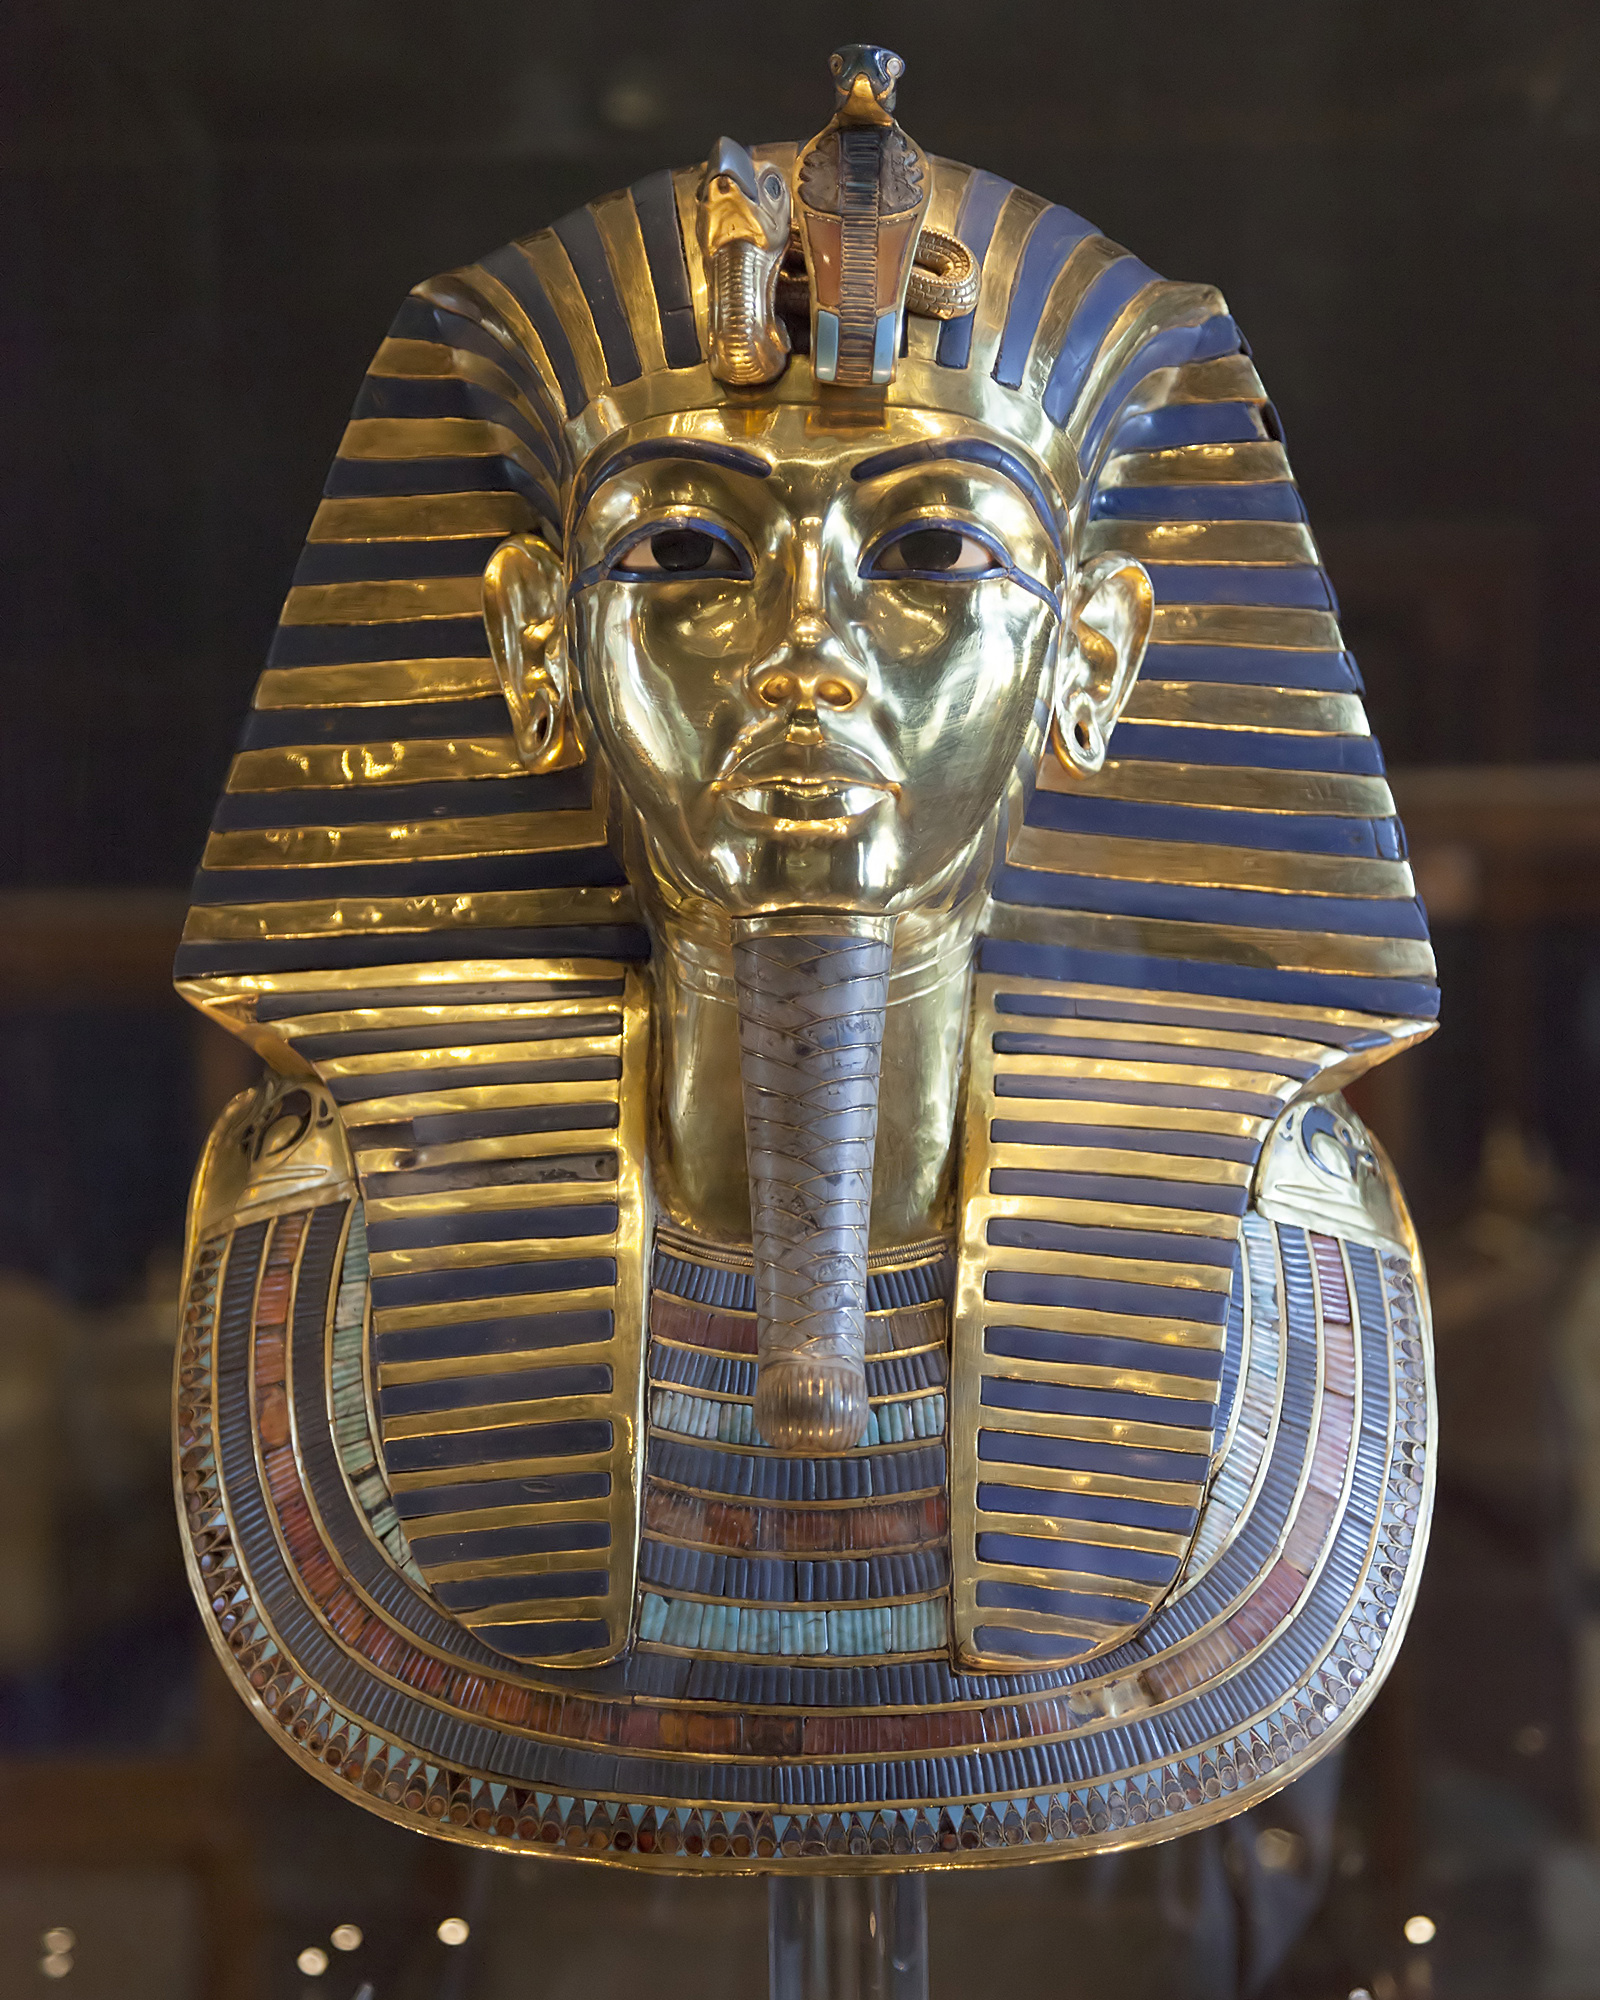 Death Mask from innermost coffin, Tutankhamun’s tomb, New Kingdom, 18th Dynasty, c. 1323 B.C.E., gold with inlay of enamel and semiprecious stones (Egyptian Museum, Cairo) (photo: Roland Unger, CC BY-SA 3.0)